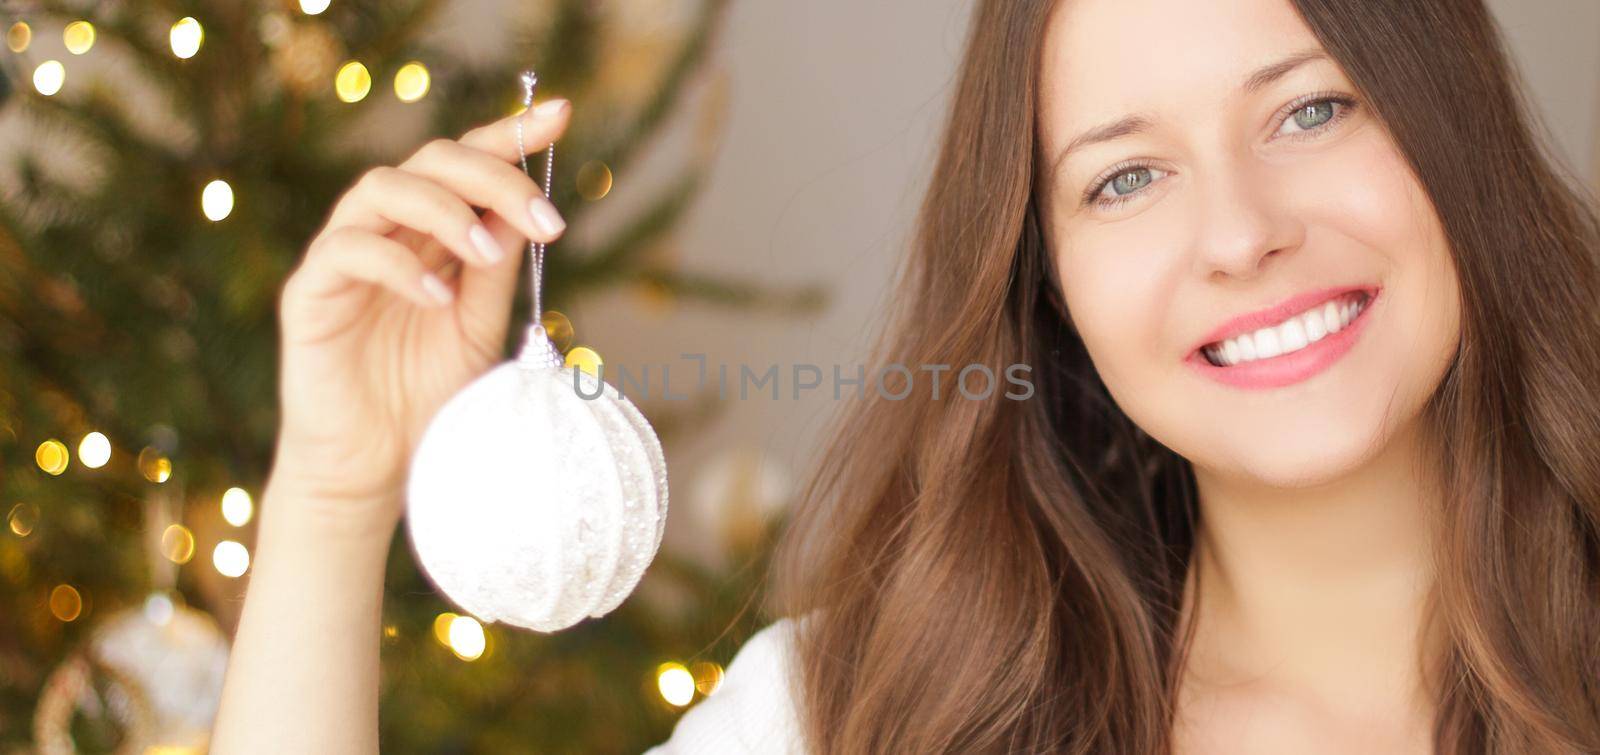 Decorating Christmas tree and winter holidays concept. Happy smiling woman holding festive ornament at home by Anneleven